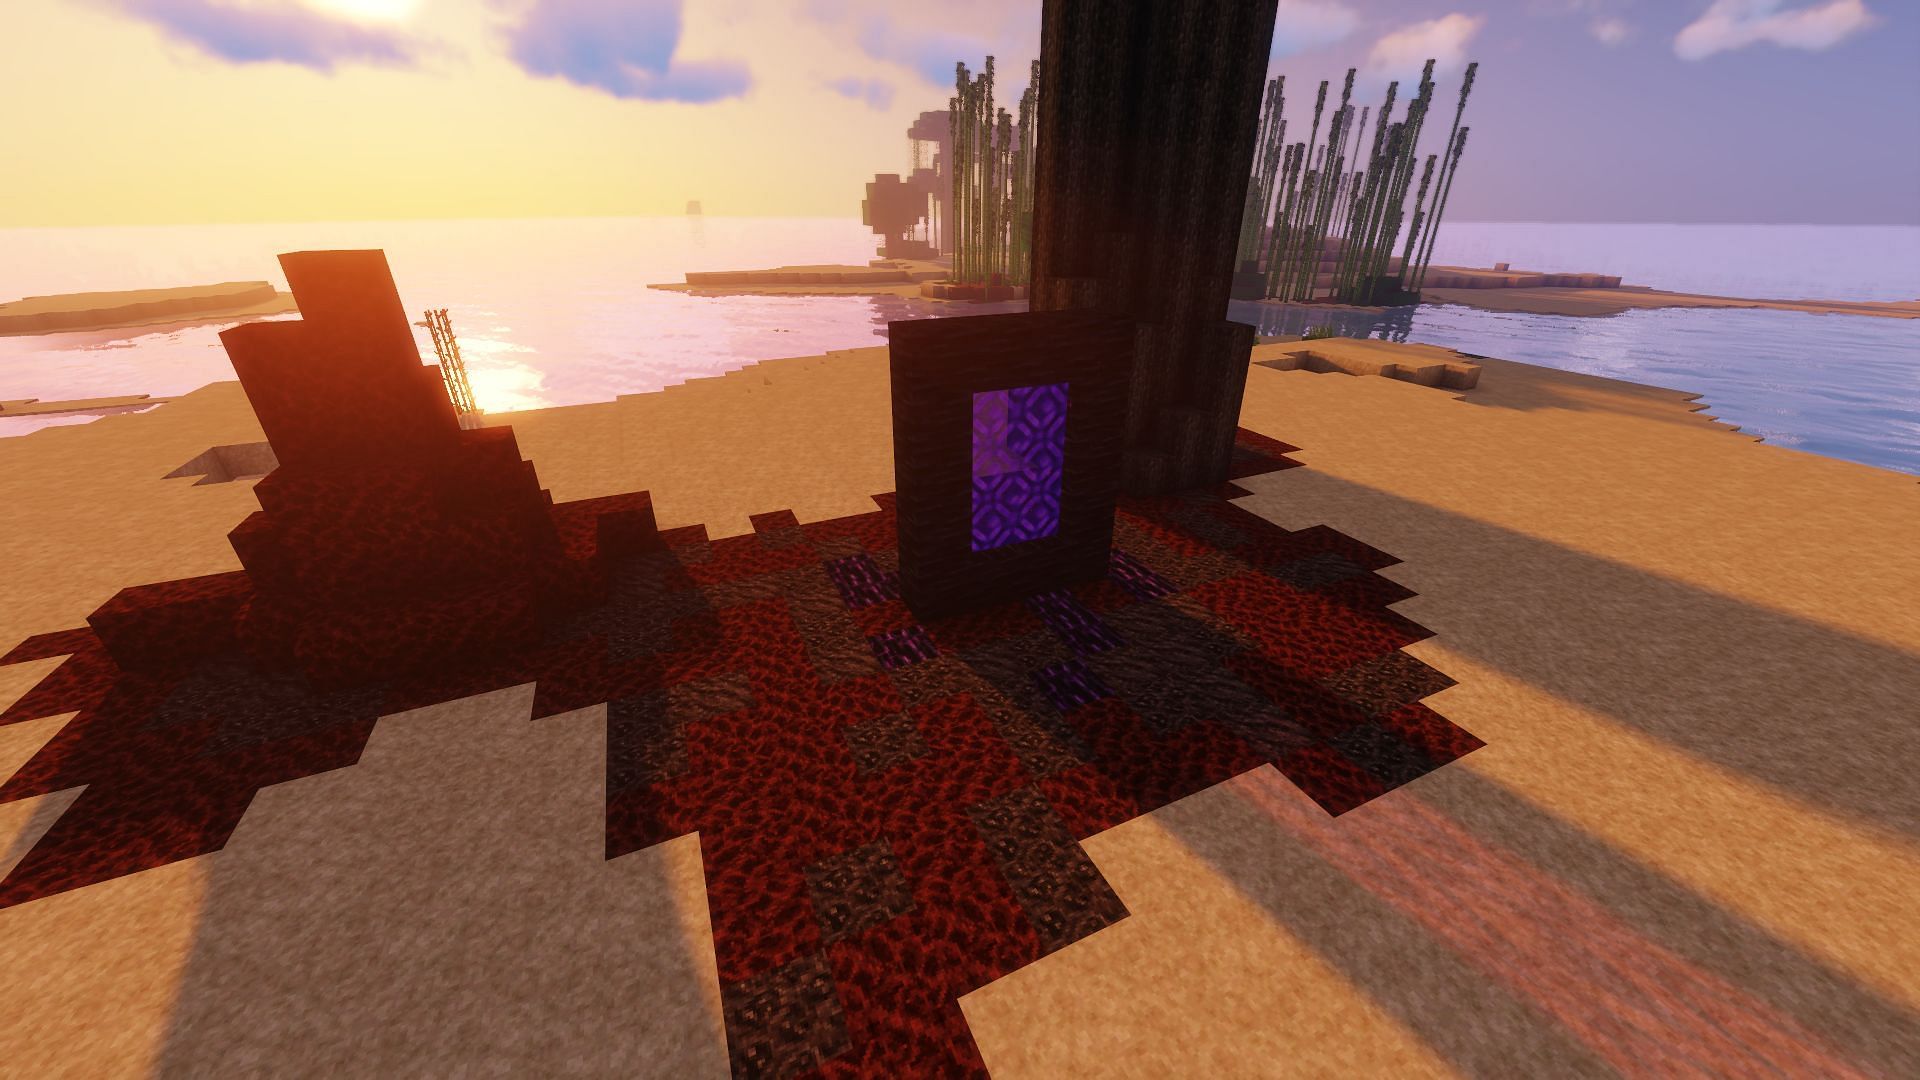 An infected Nether portal with the Clarity texture pack (Image via Minecraft)